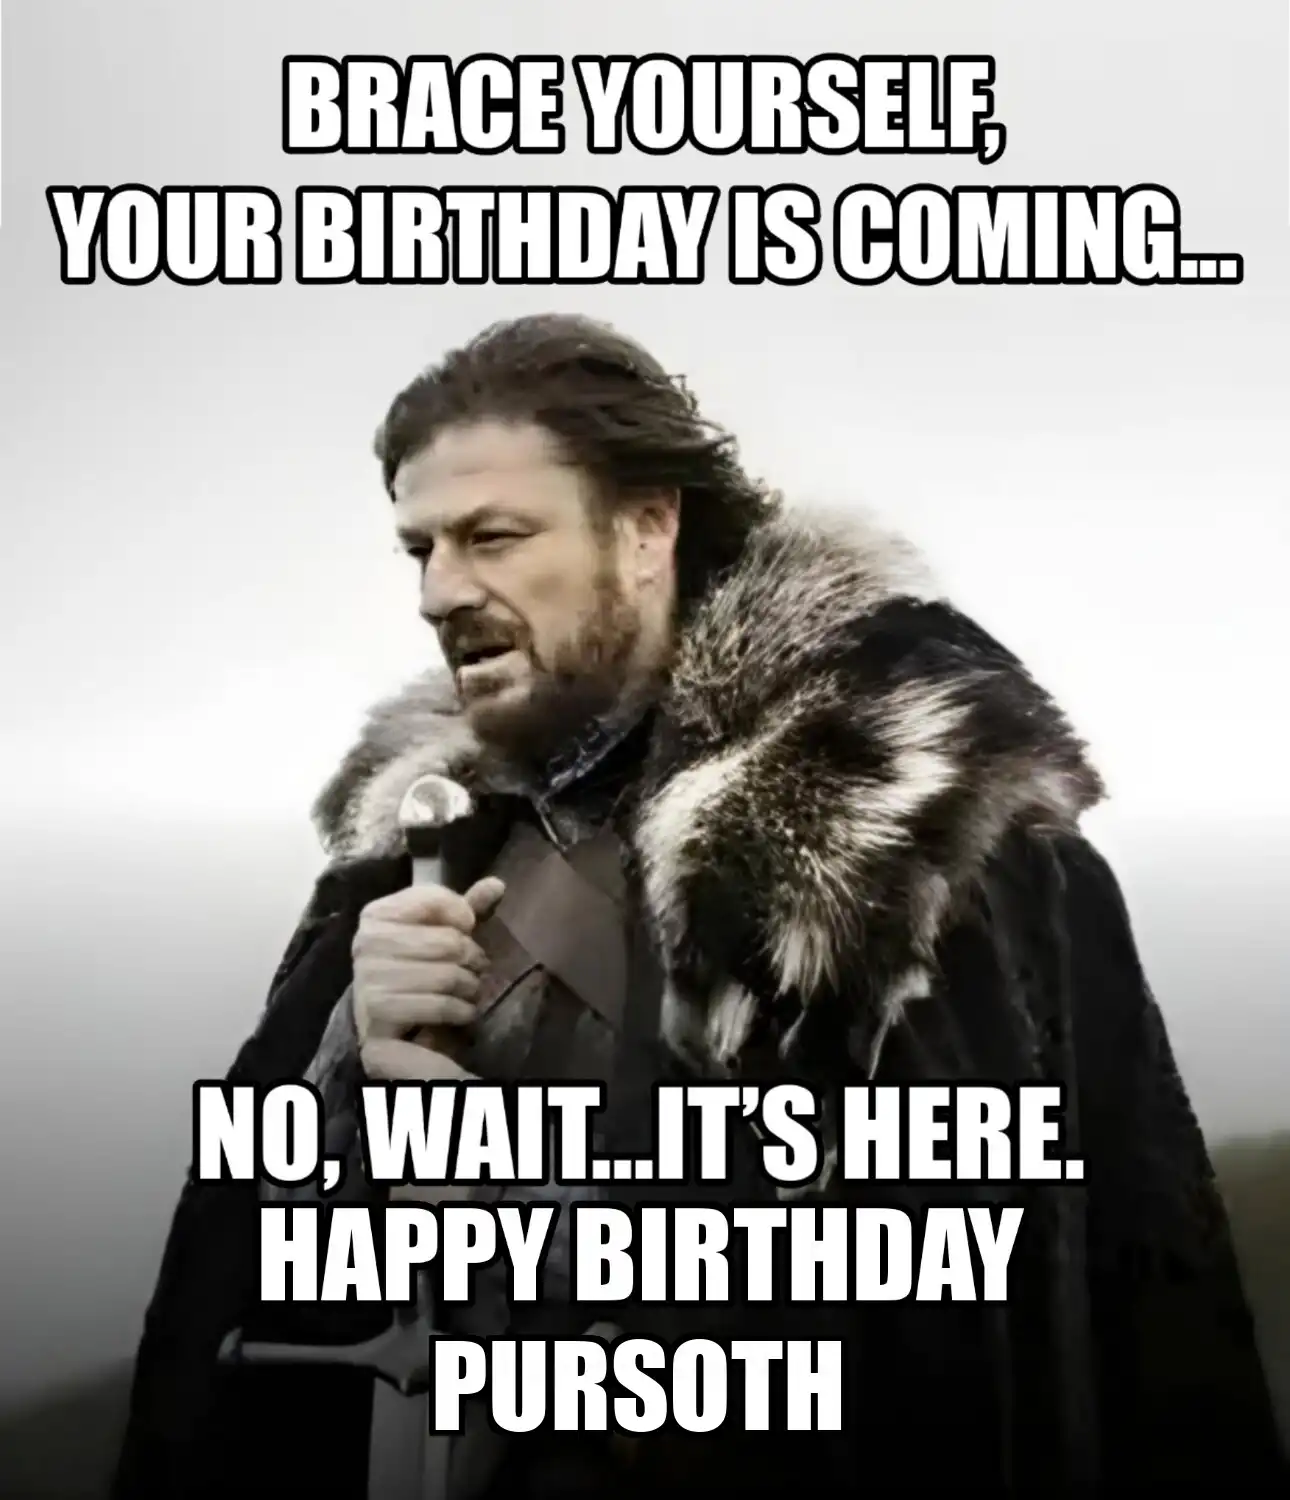 Happy Birthday Pursoth Brace Yourself Your Birthday Is Coming Meme